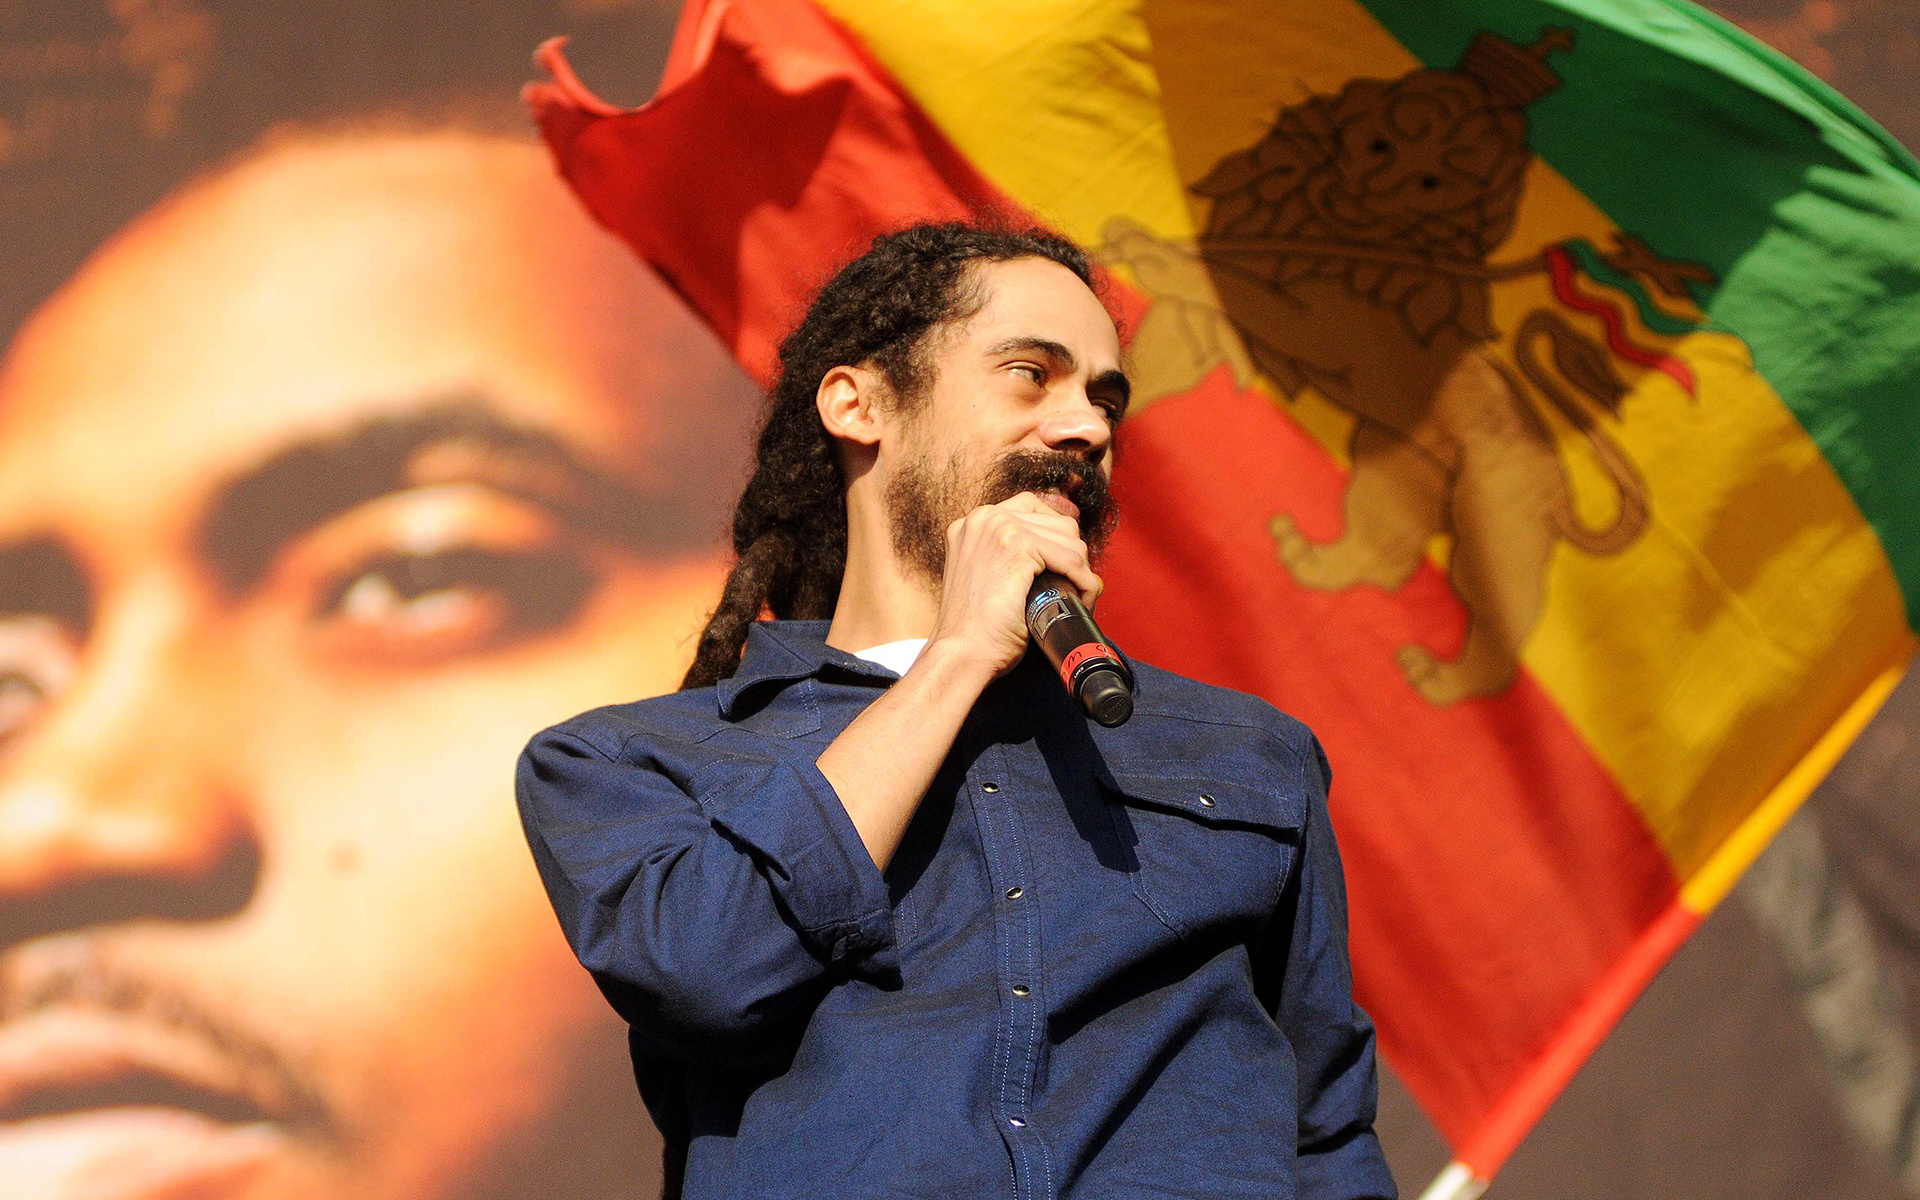 Damian Marley, Damian Marley pics, Captivating imagery, Ethan Peltier collection, 1920x1200 HD Desktop